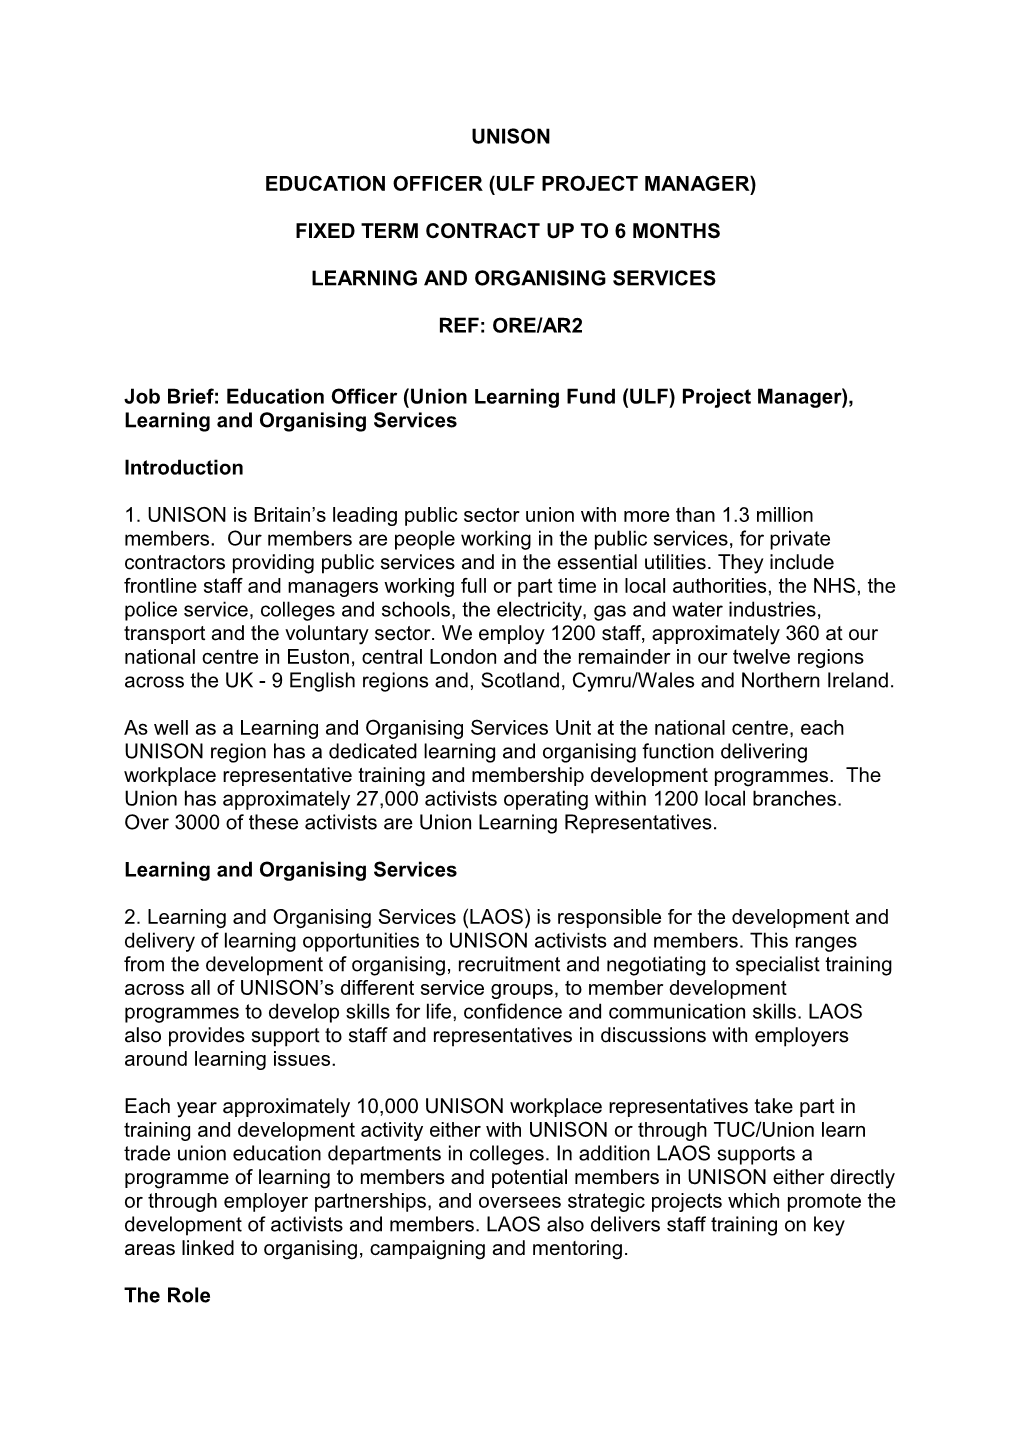 Job Brief JD and Person Specification - Education Officer (ULF) - LAOS (July 2016)